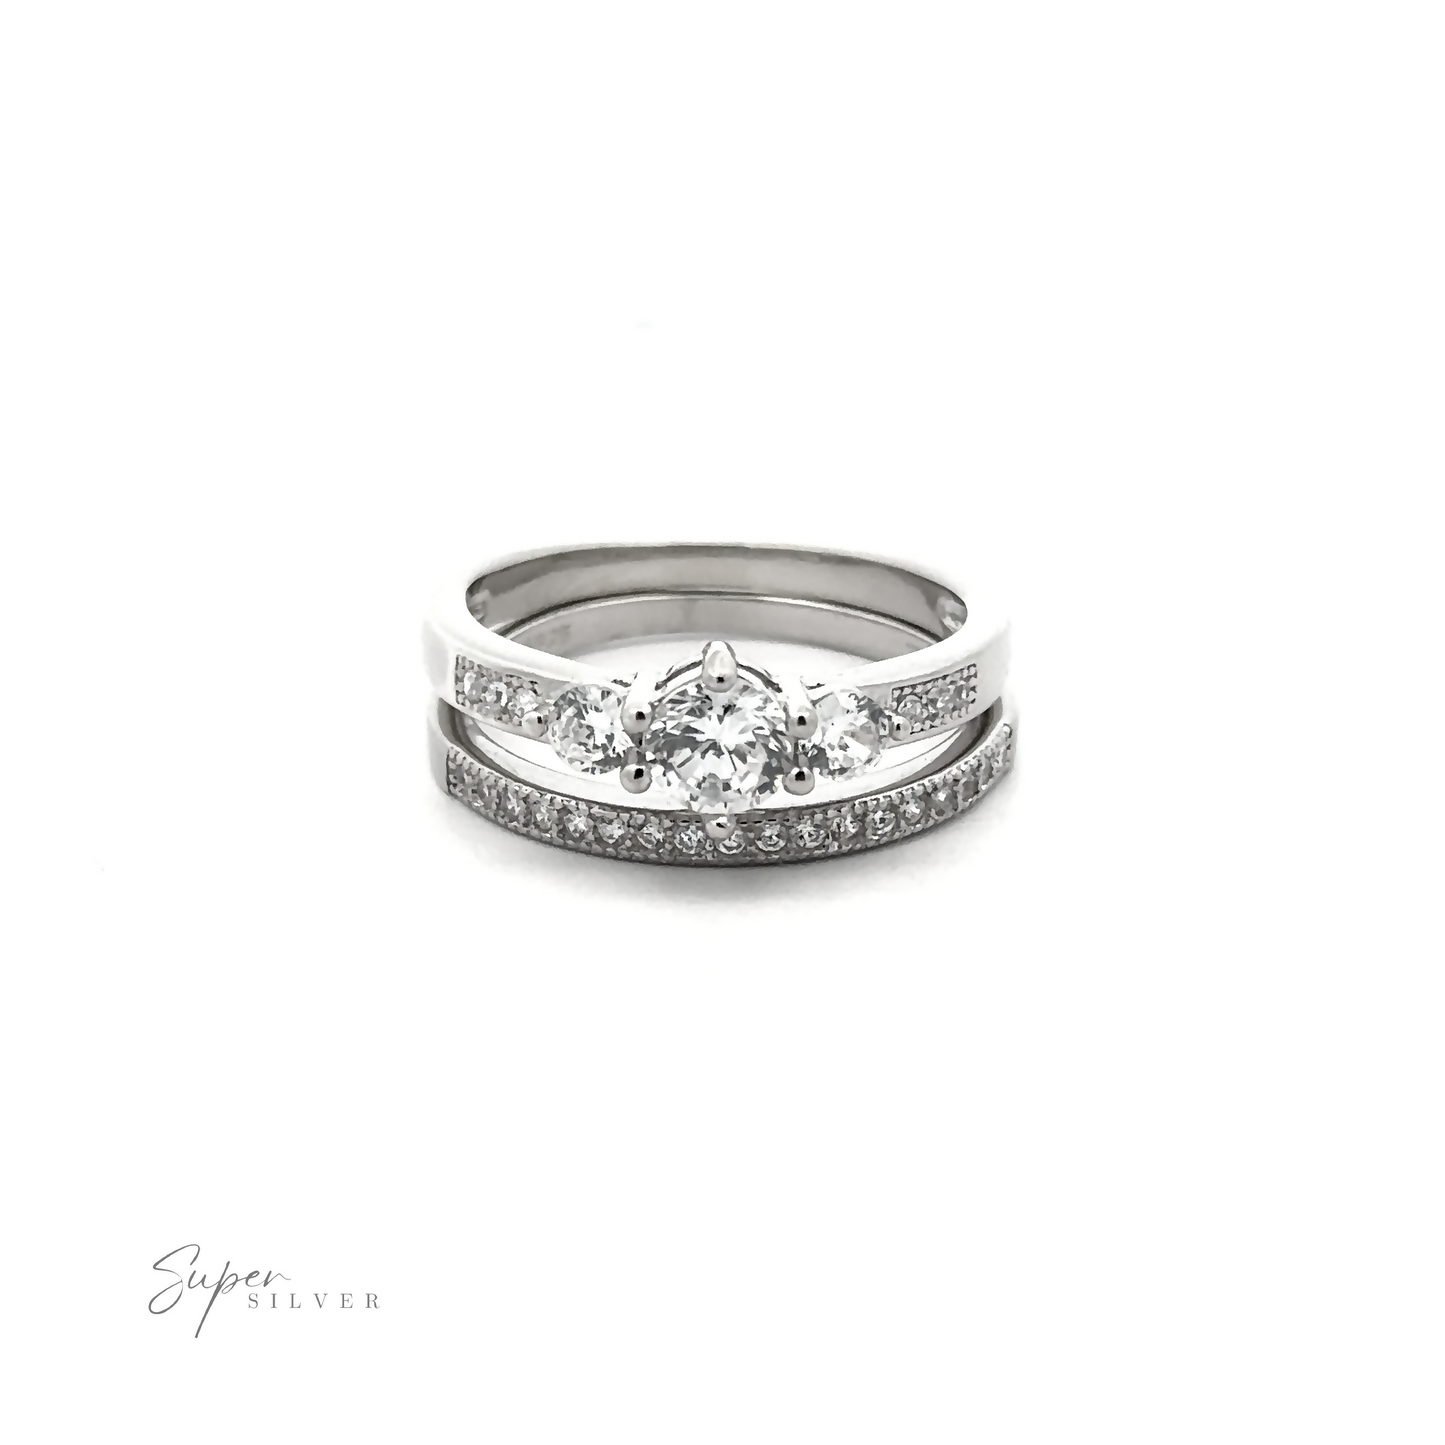 
                  
                    Discover the affordable Round Cubic Zirconia Wedding Band Set featuring a silver ring adorned with a central larger high-quality cubic zirconia stone and smaller stones on the band, complete with the "Super Silver" logo in the bottom left corner. Perfect for those seeking elegance without compromise.
                  
                